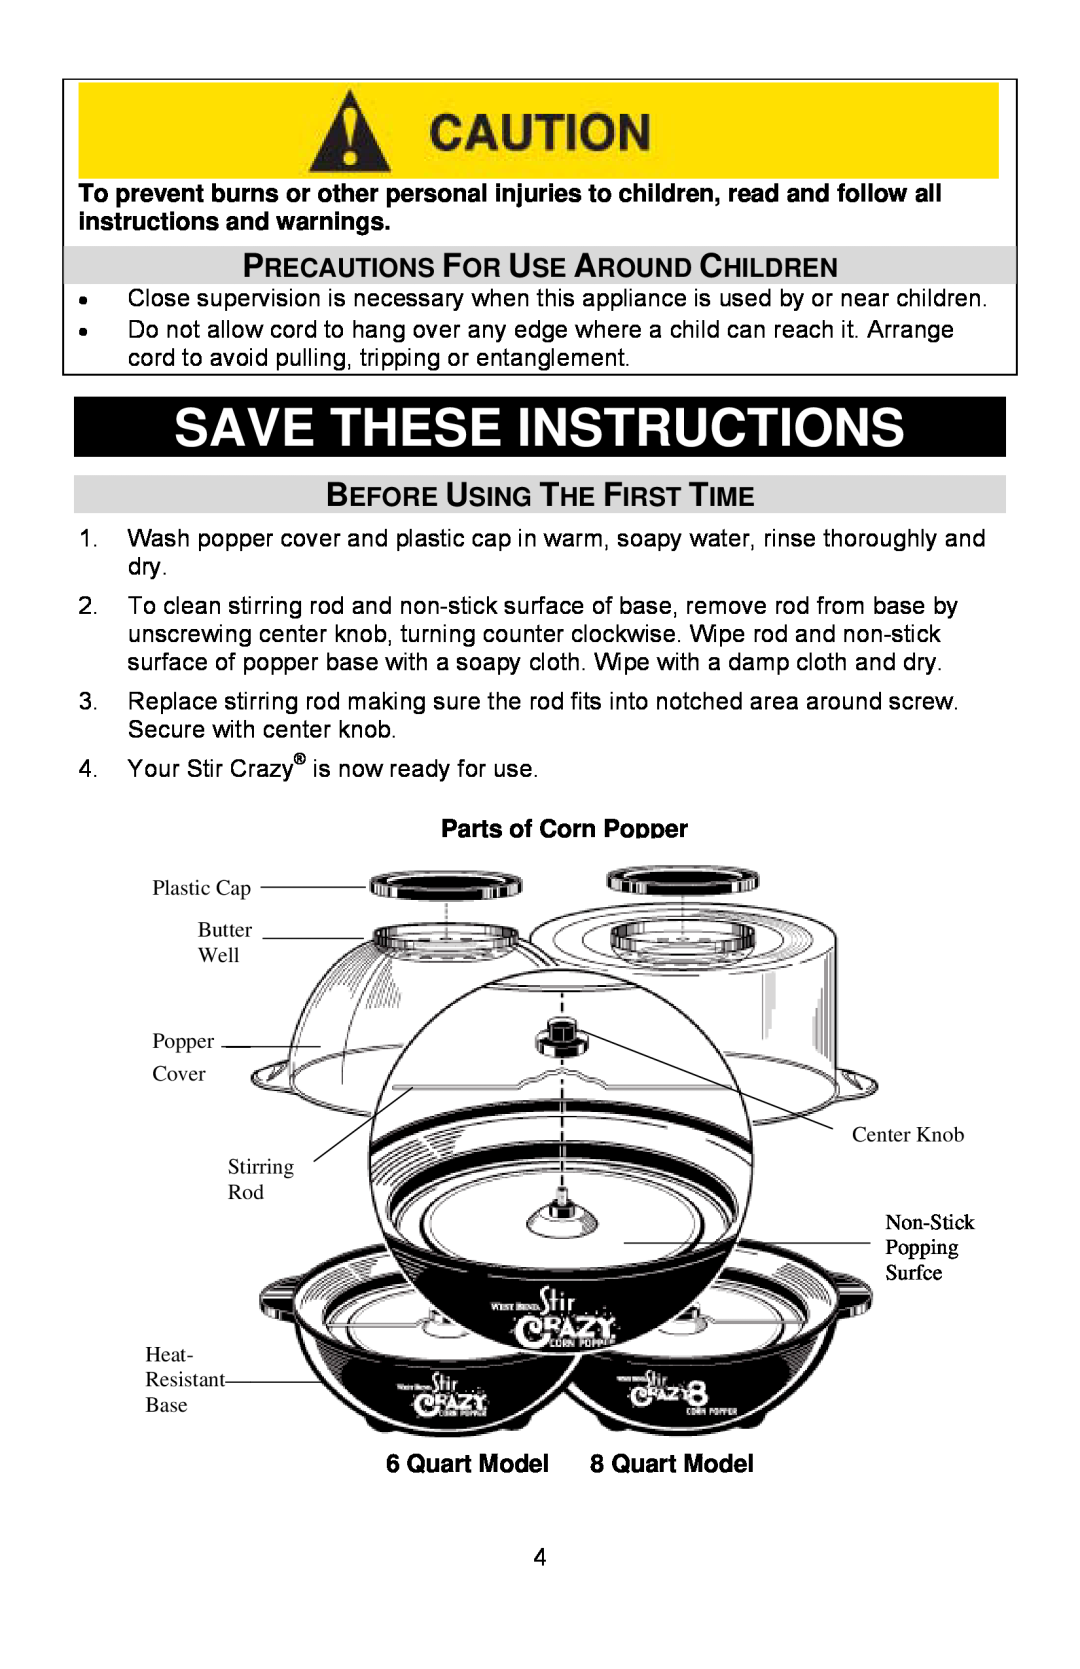 West Bend 82306, L5557B Save These Instructions, Precautions For Use Around Children, Before Using The First Time 